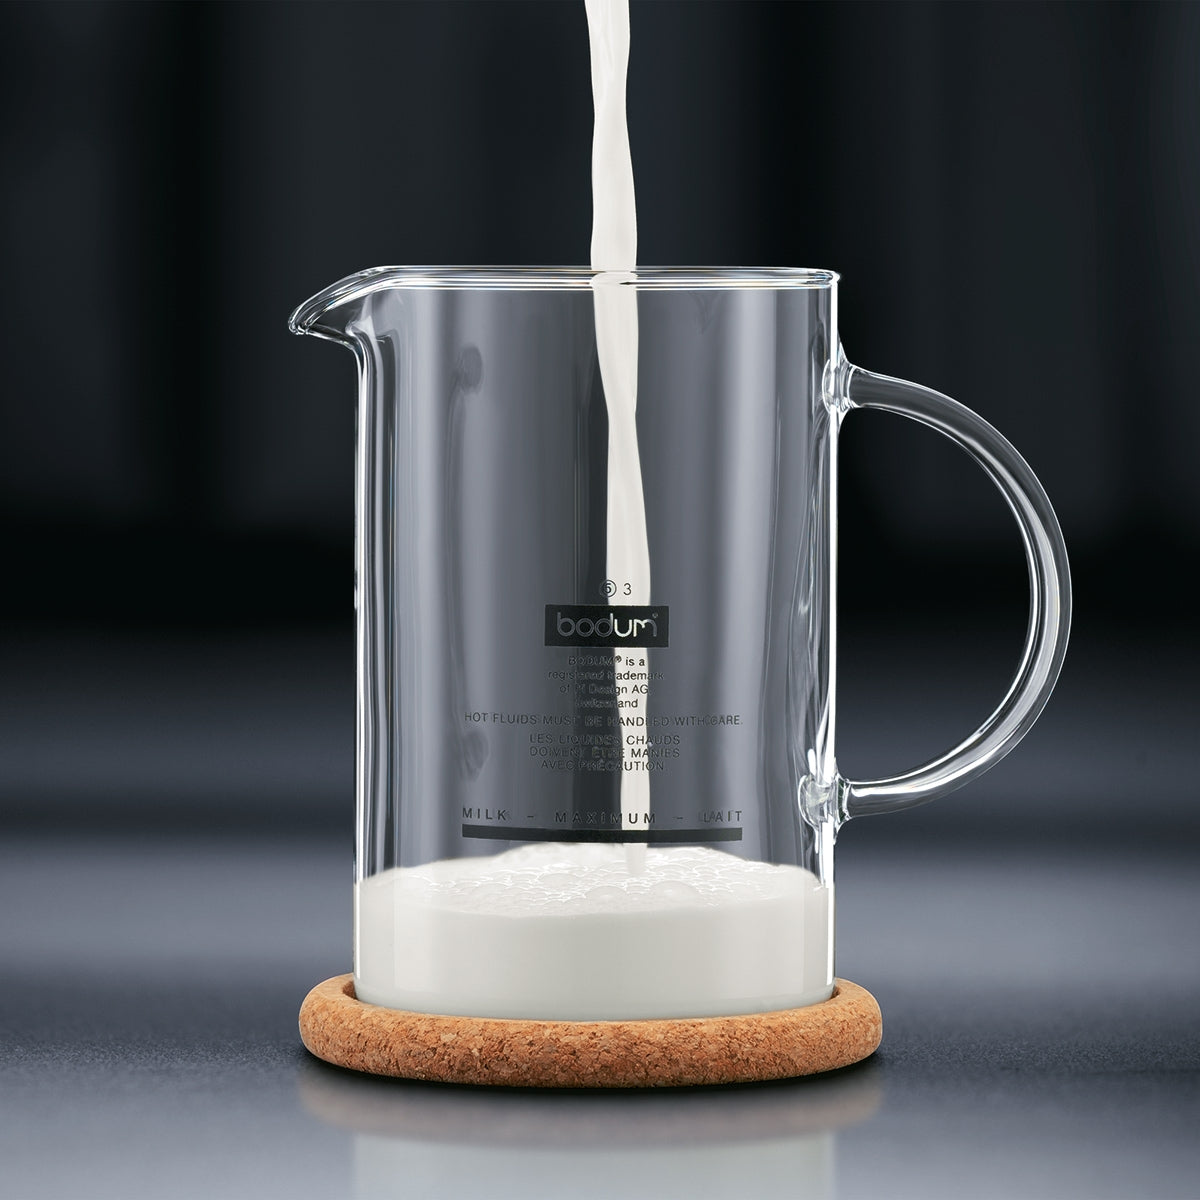  Bodum 1446-01US4 Latteo Manual Milk Frother, 8 Ounce